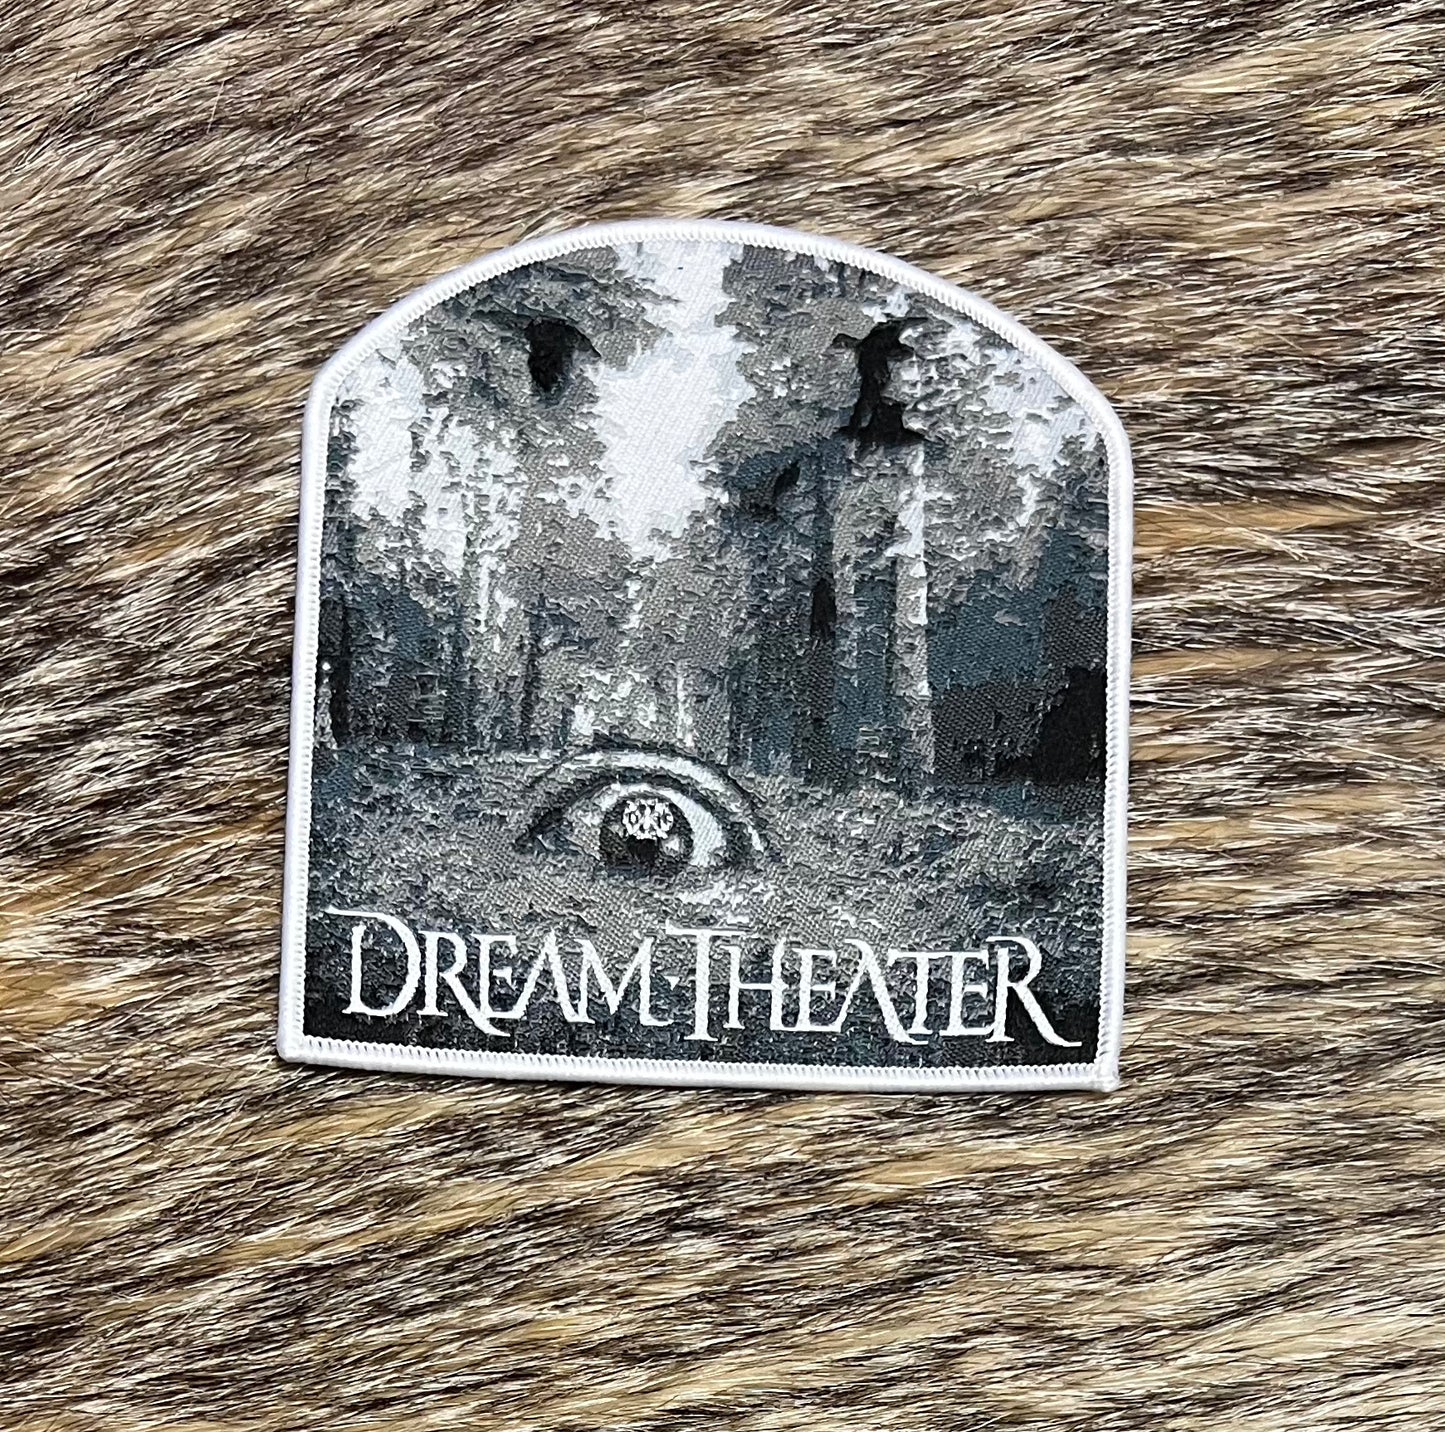 Dream Theater - Train Of Thought Patch